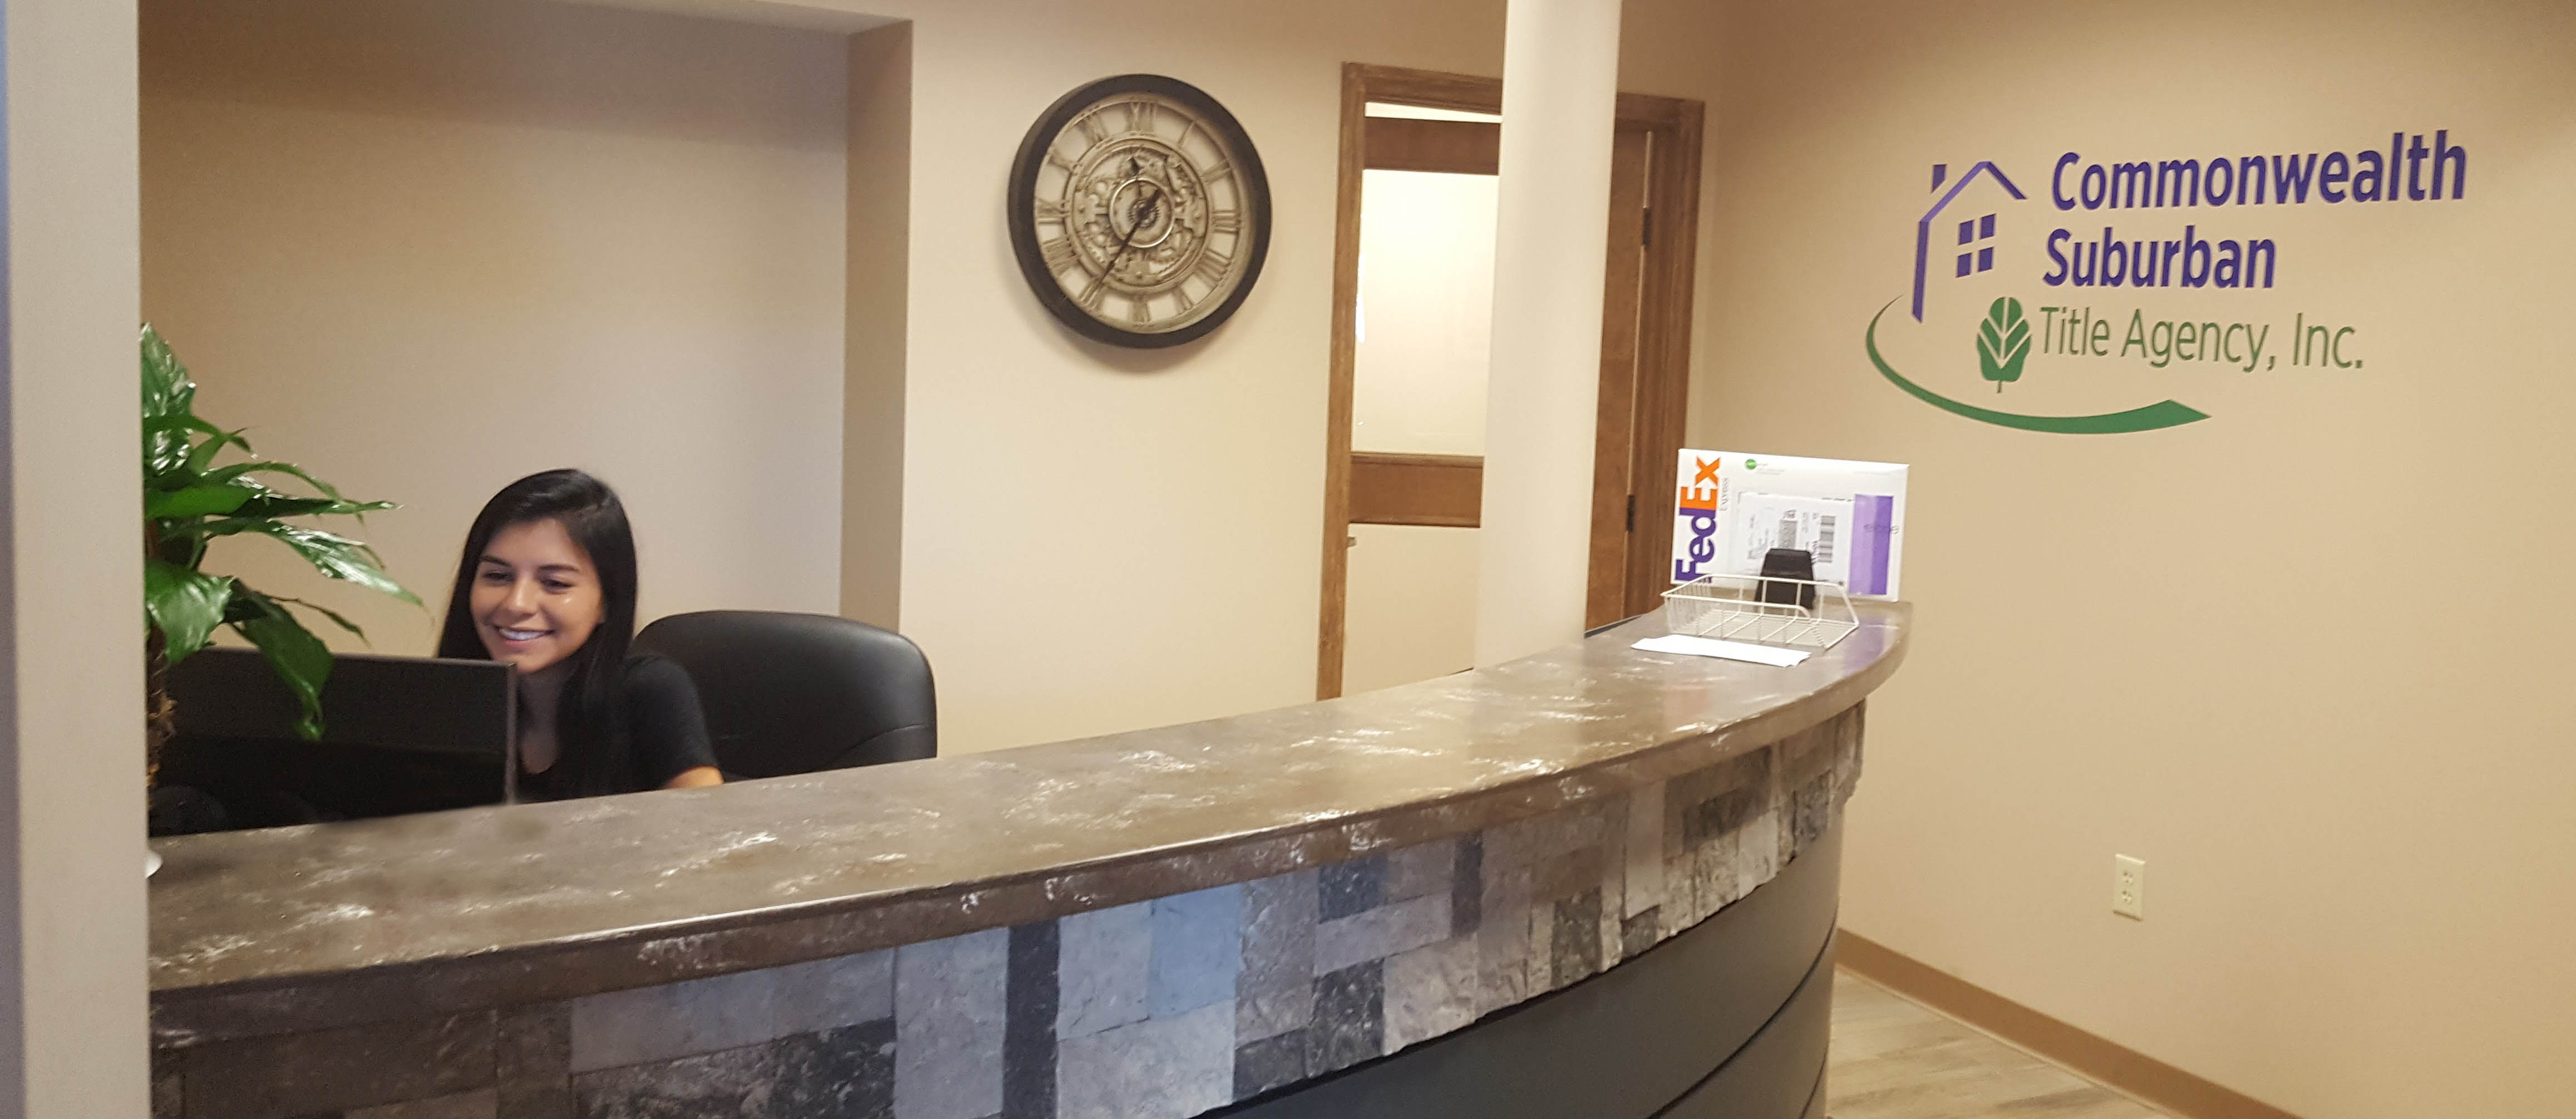 Receptionist at desk in the Commonwealth Suburban Title Agency's Canfield Office